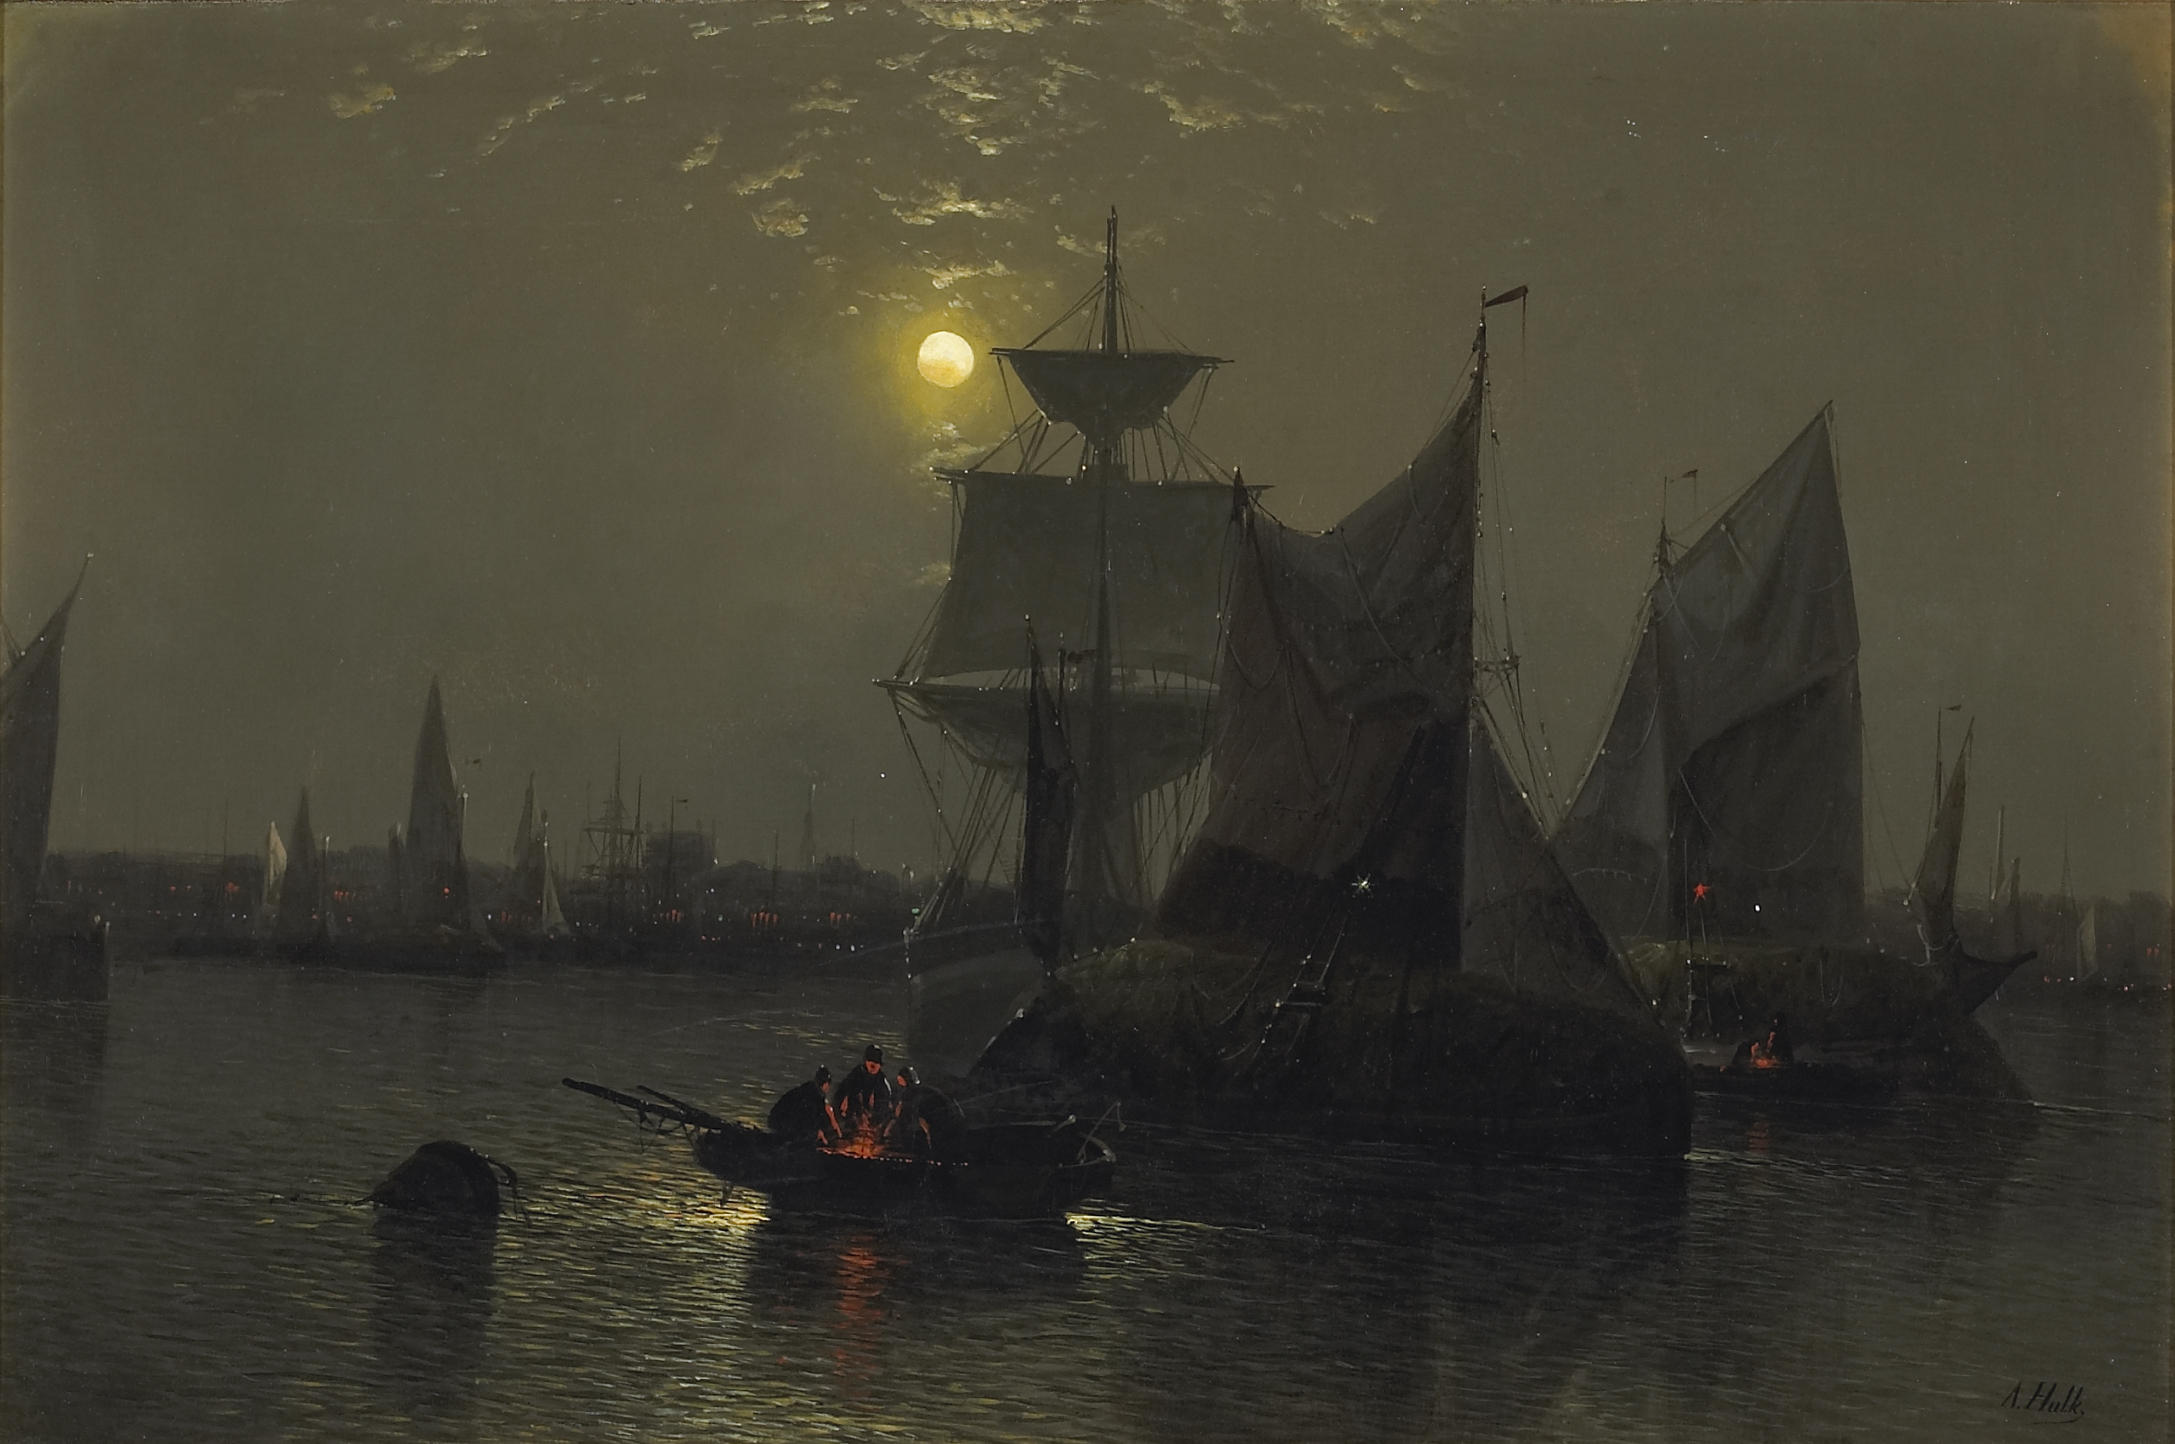 Abraham Hulk, Snr - Sailing vessels in a moonlit harbor with fishermen and their boats in the foreground